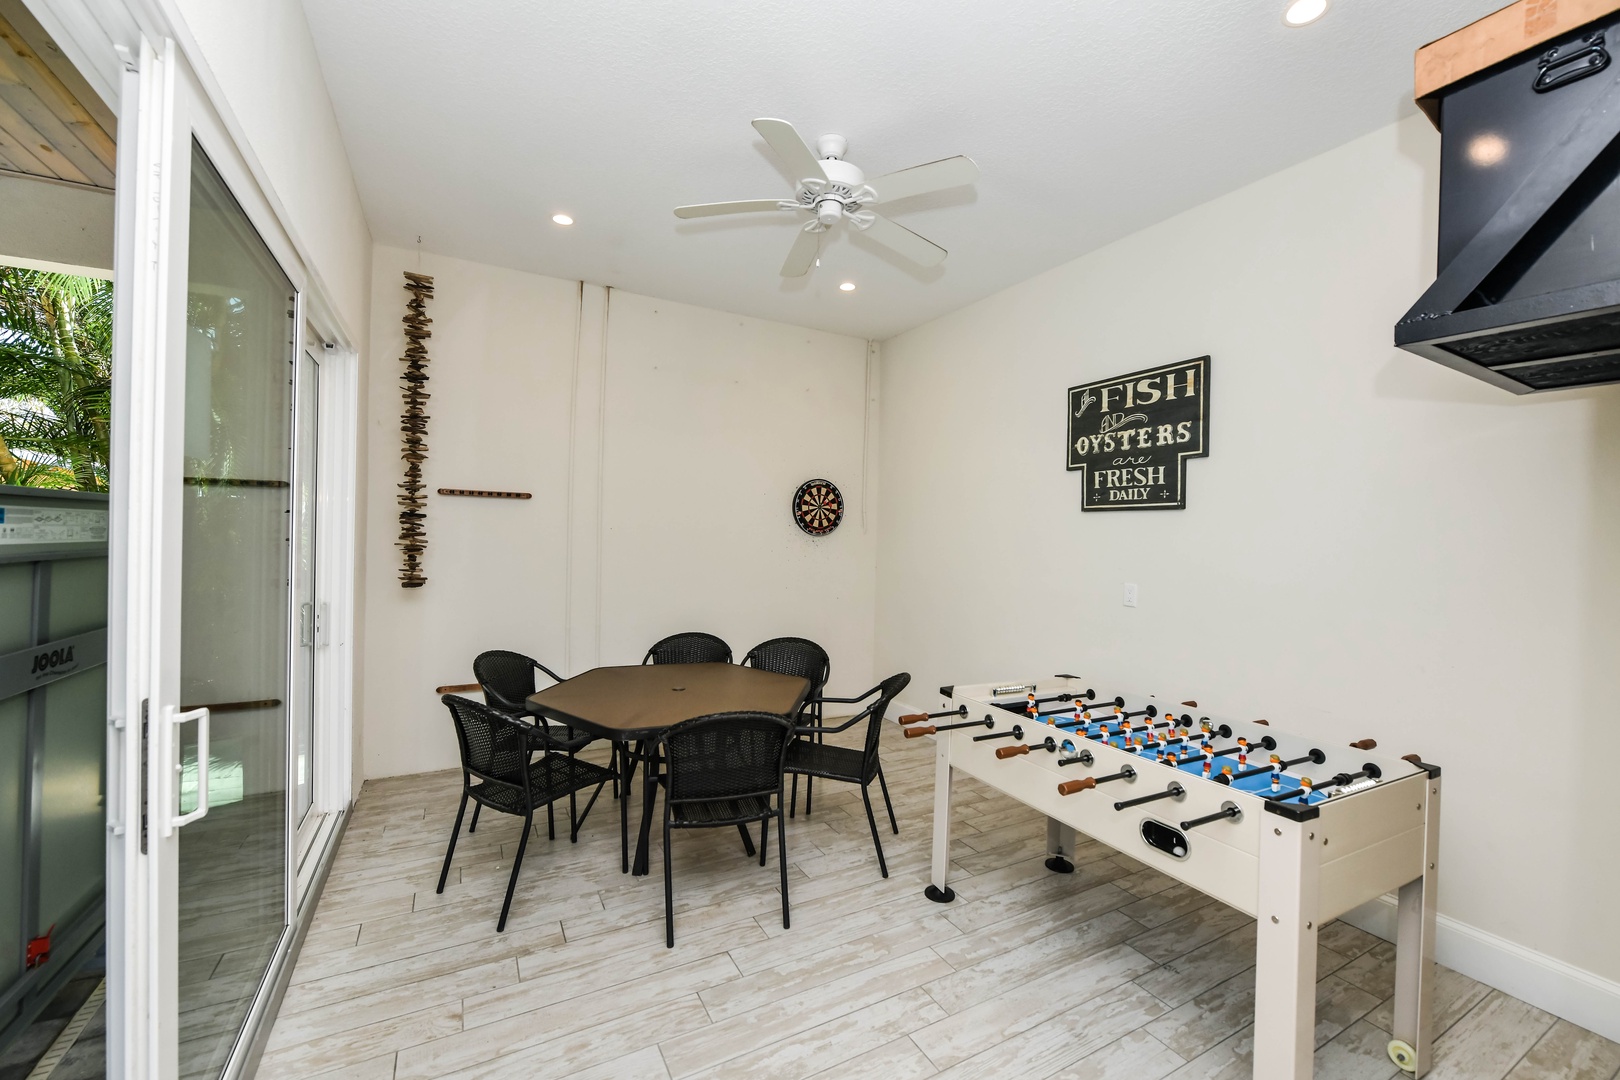 Game Room with Foosball Table